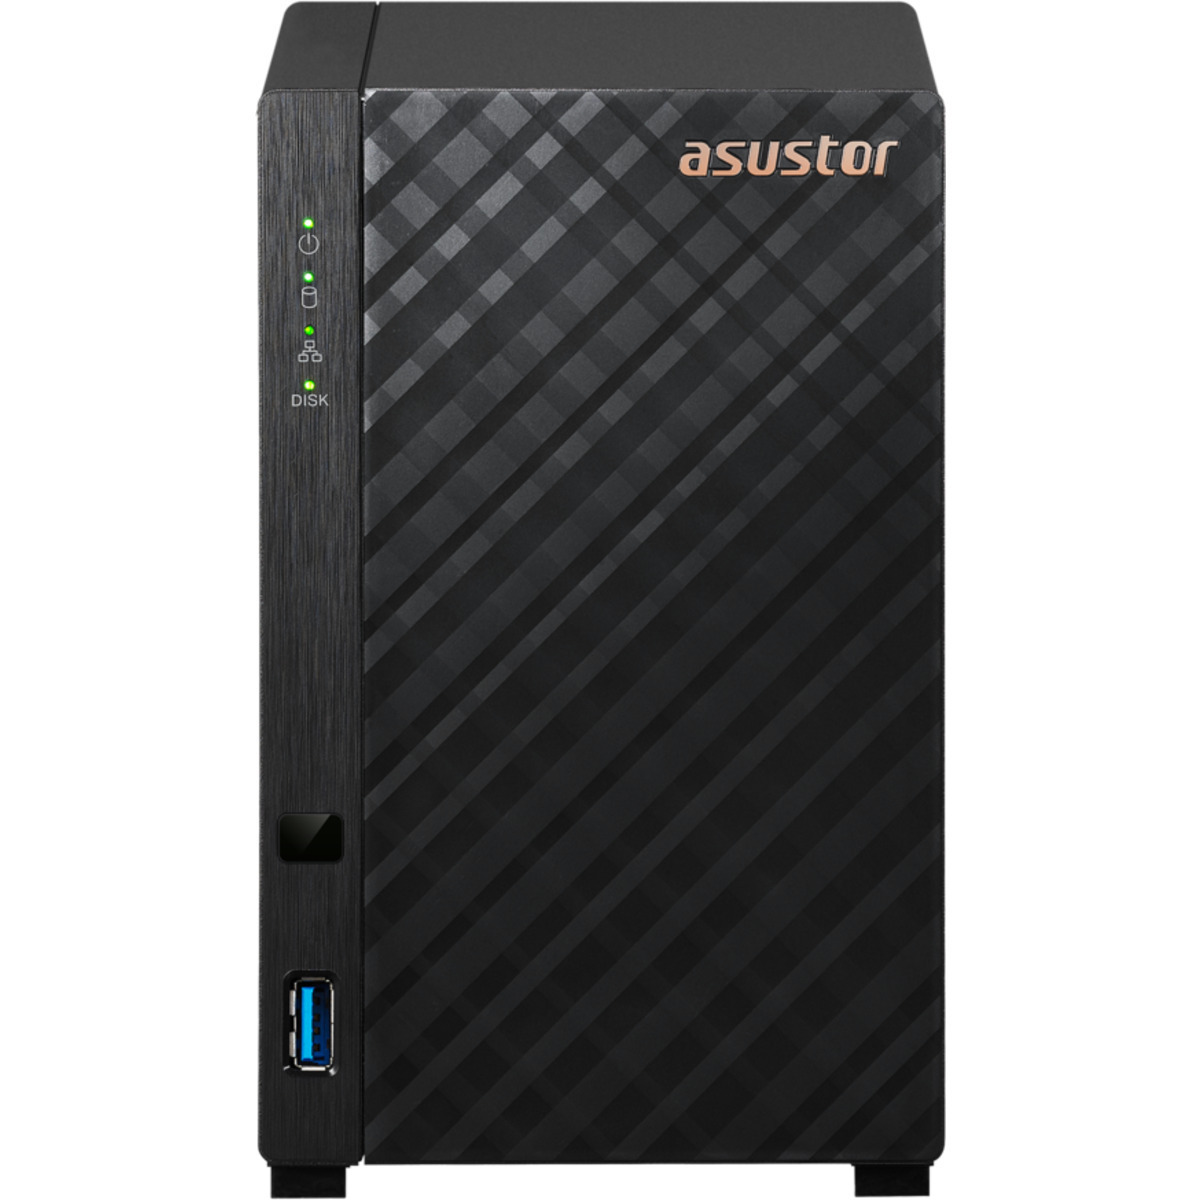 ASUSTOR DRIVESTOR 2 Lite AS1102TL 16tb 2-Bay Desktop Personal / Basic Home / Small Office NAS - Network Attached Storage Device 2x8tb Seagate IronWolf ST8000VN004 3.5 7200rpm SATA 6Gb/s HDD NAS Class Drives Installed - Burn-In Tested DRIVESTOR 2 Lite AS1102TL